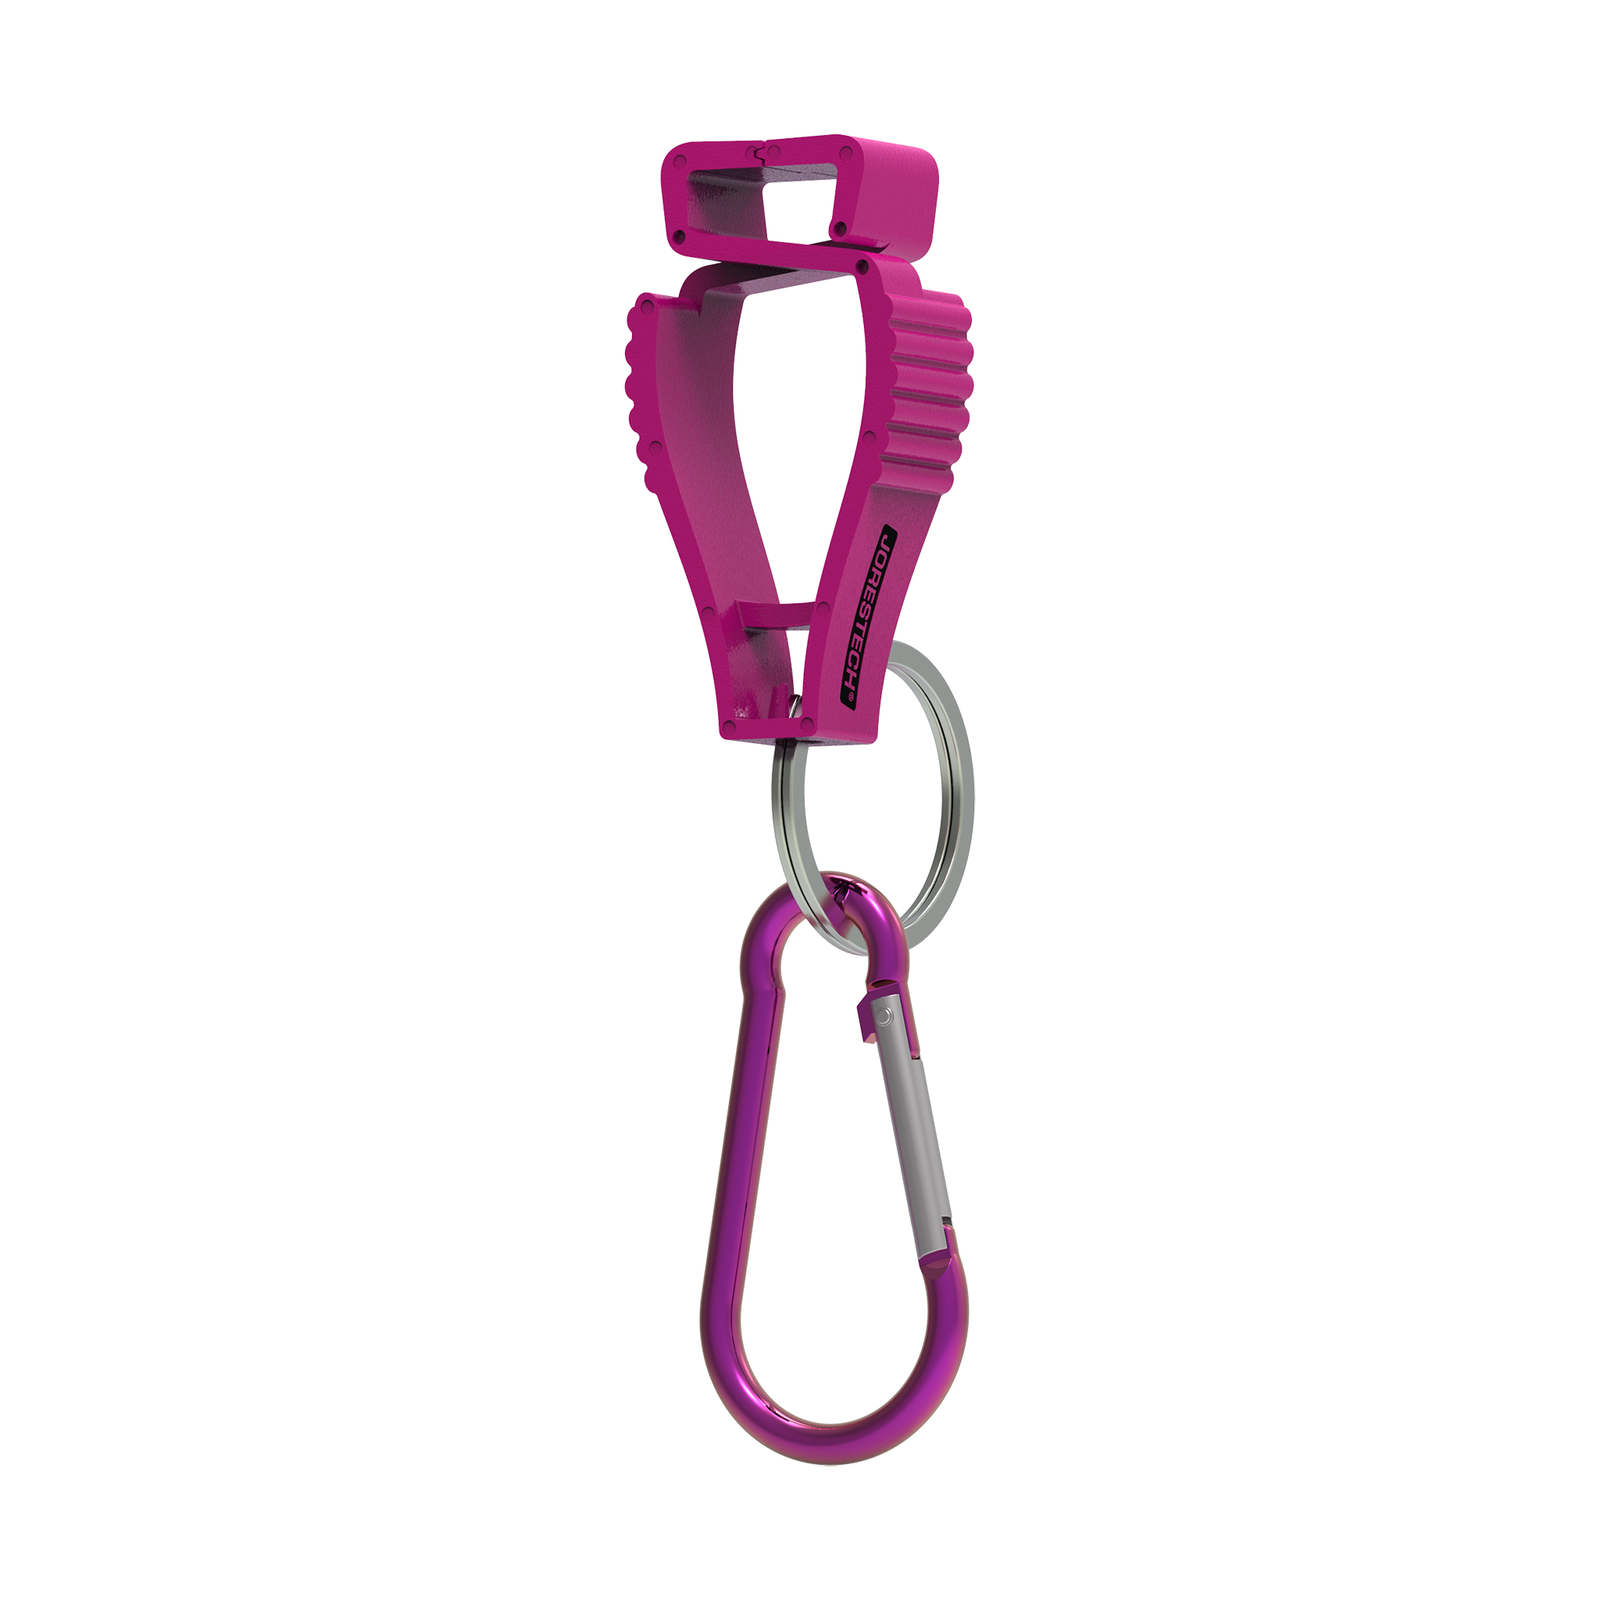 pink glove clips safety holder and grabber with carabiner